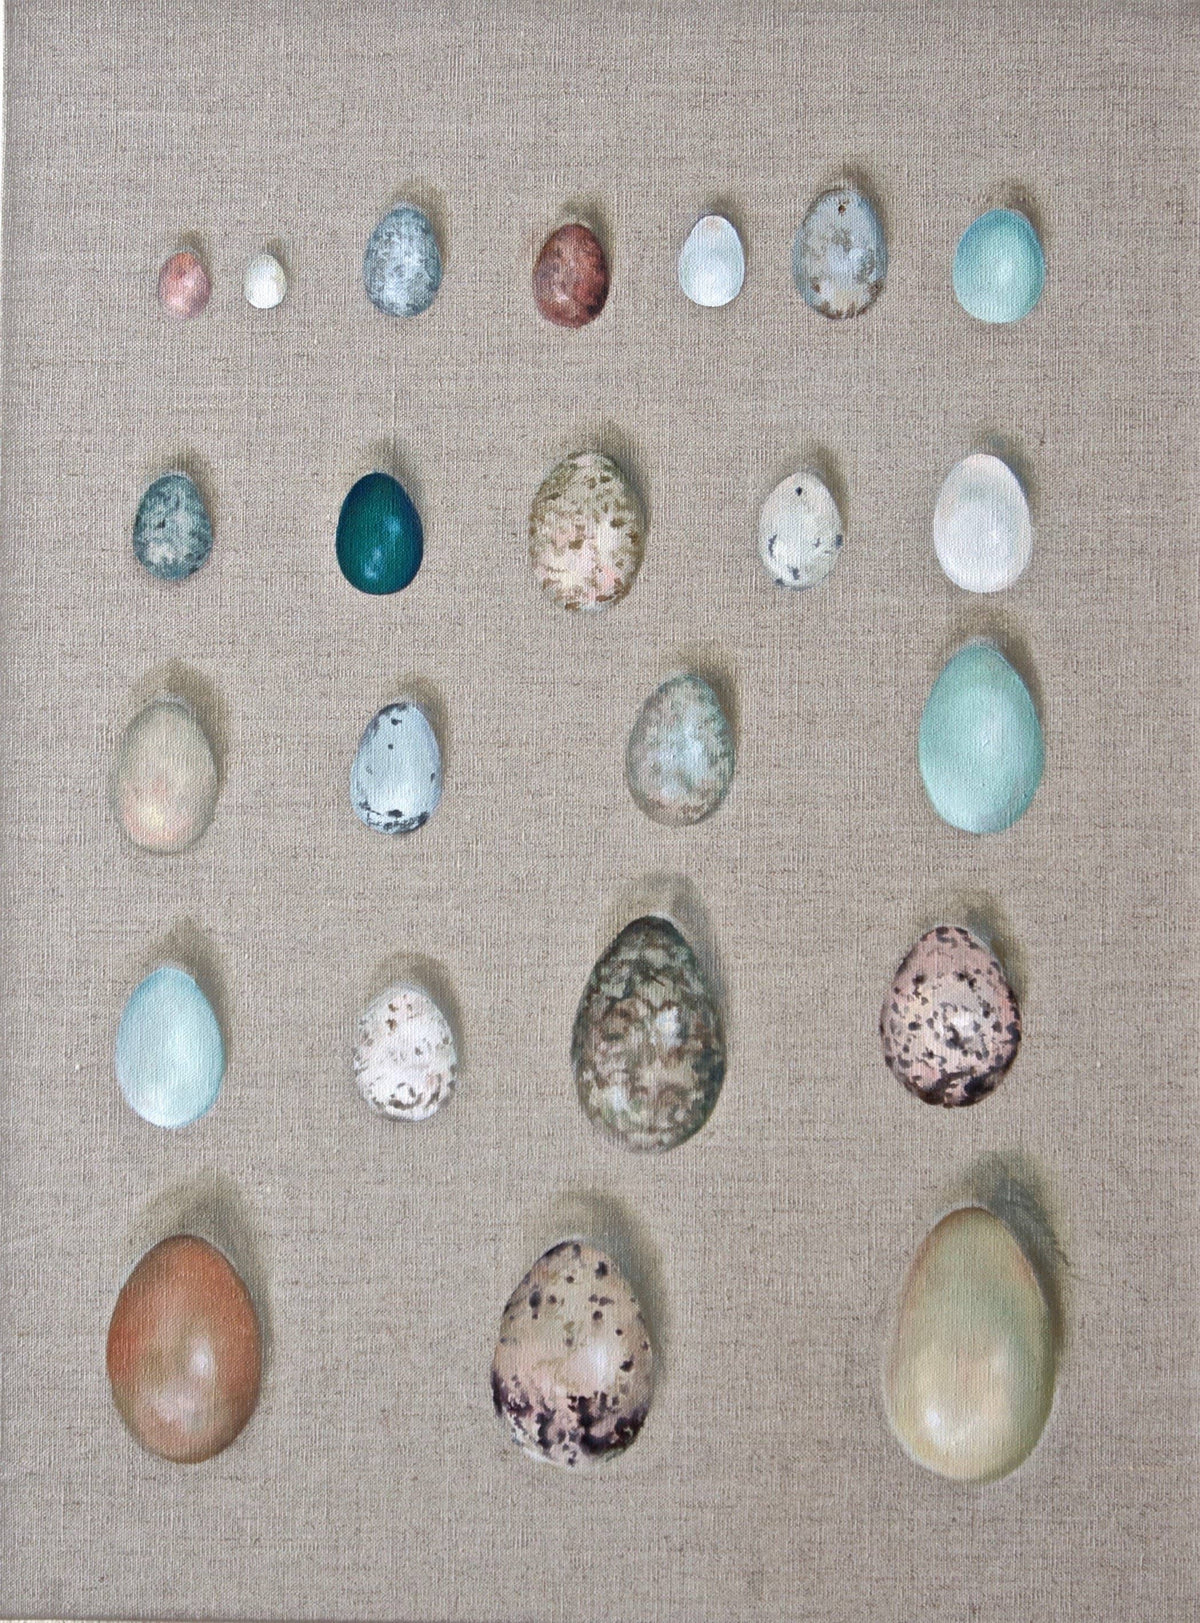 Contemporary bird art with the focus on the delicacy of bird's eggs in neutral tones